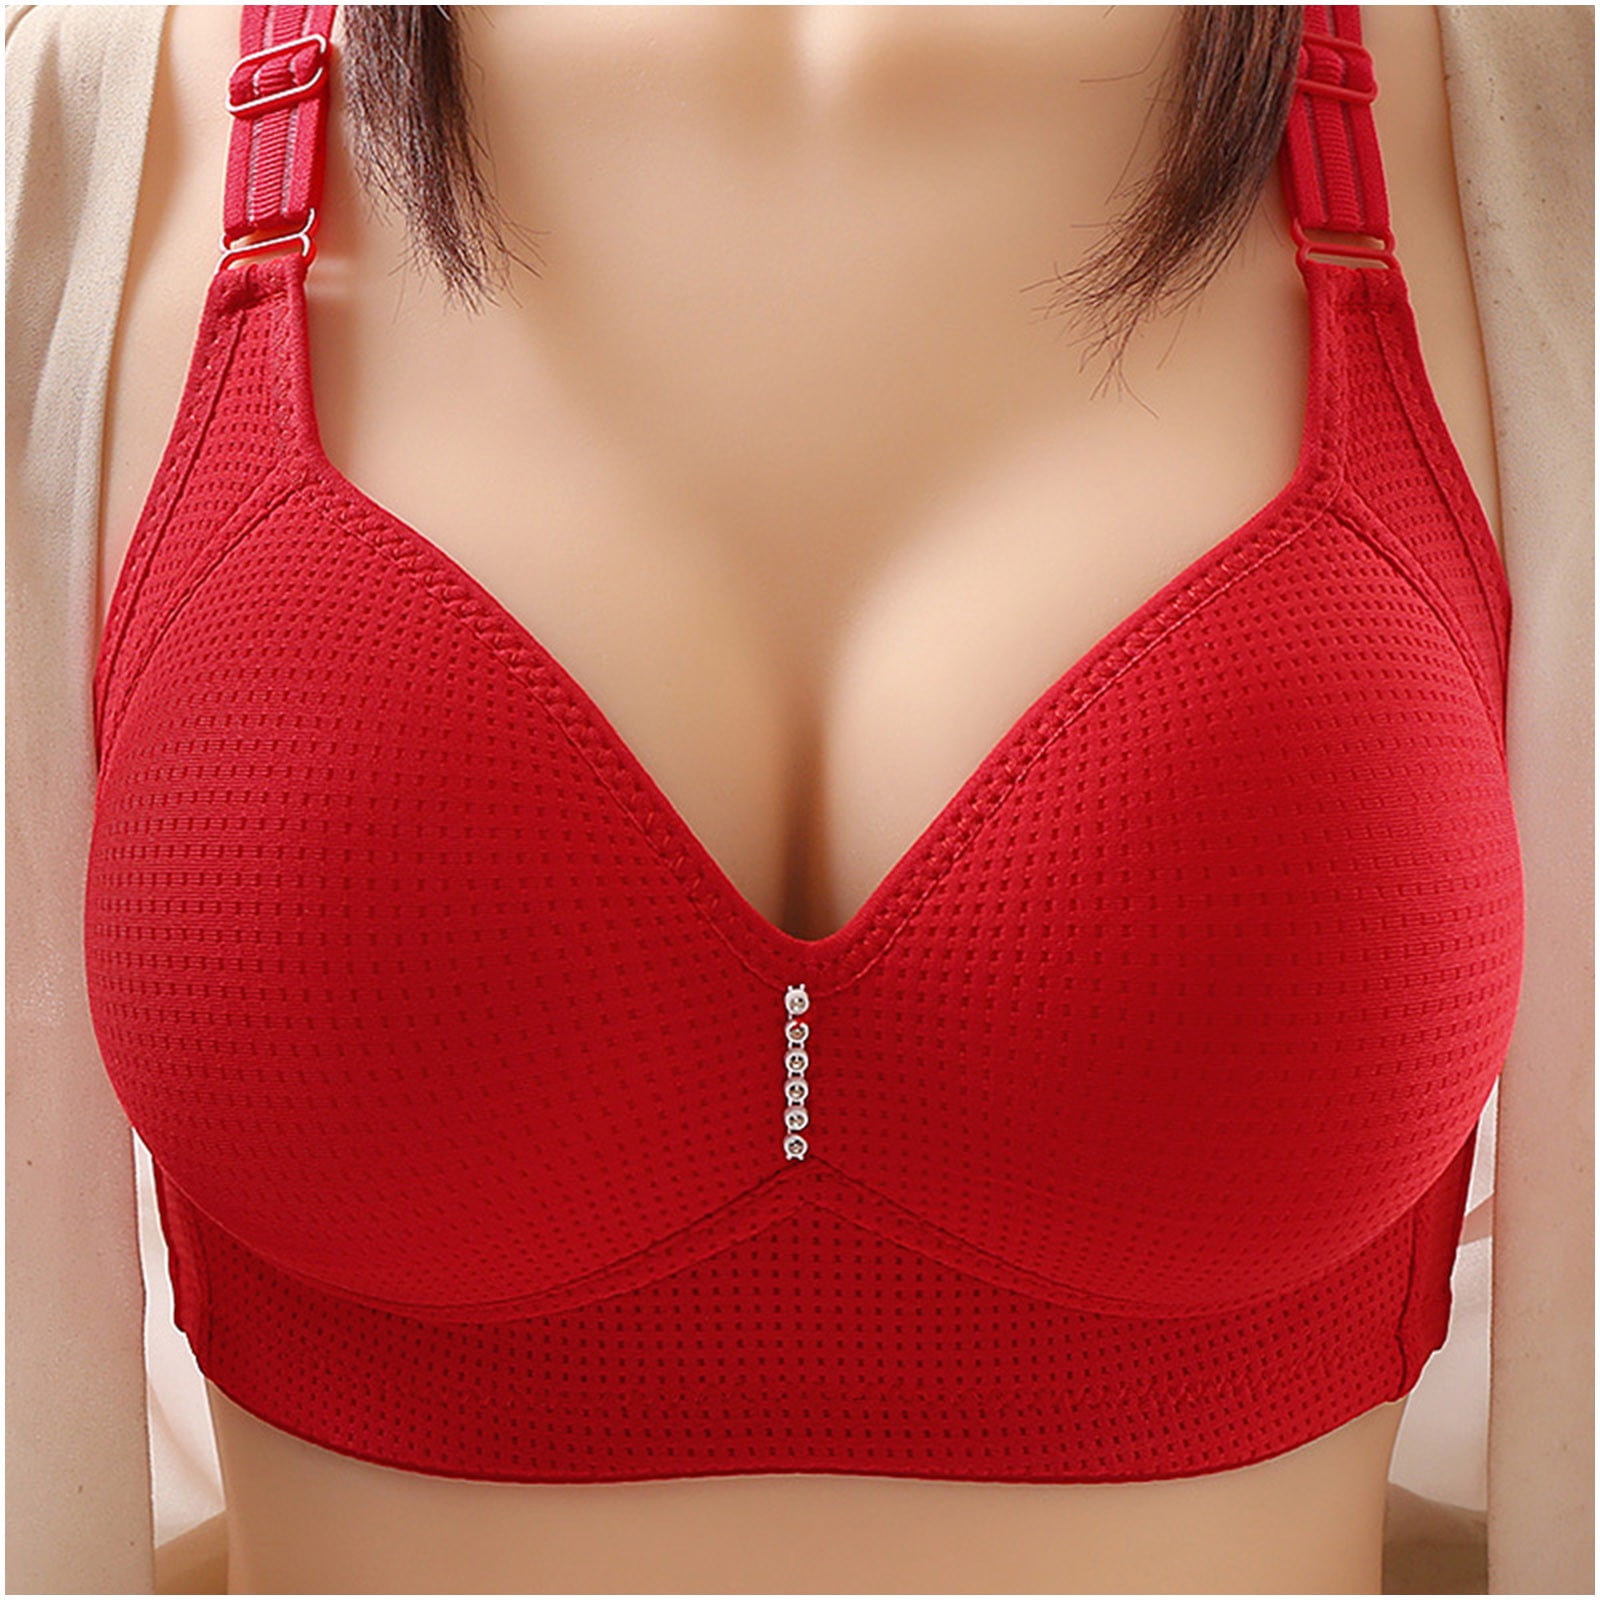 VALSEEL Woman Sexy Ladies Bra Without Steel Rings Sexy Vest Large Size  Lingerie Underwire Nursing Bras